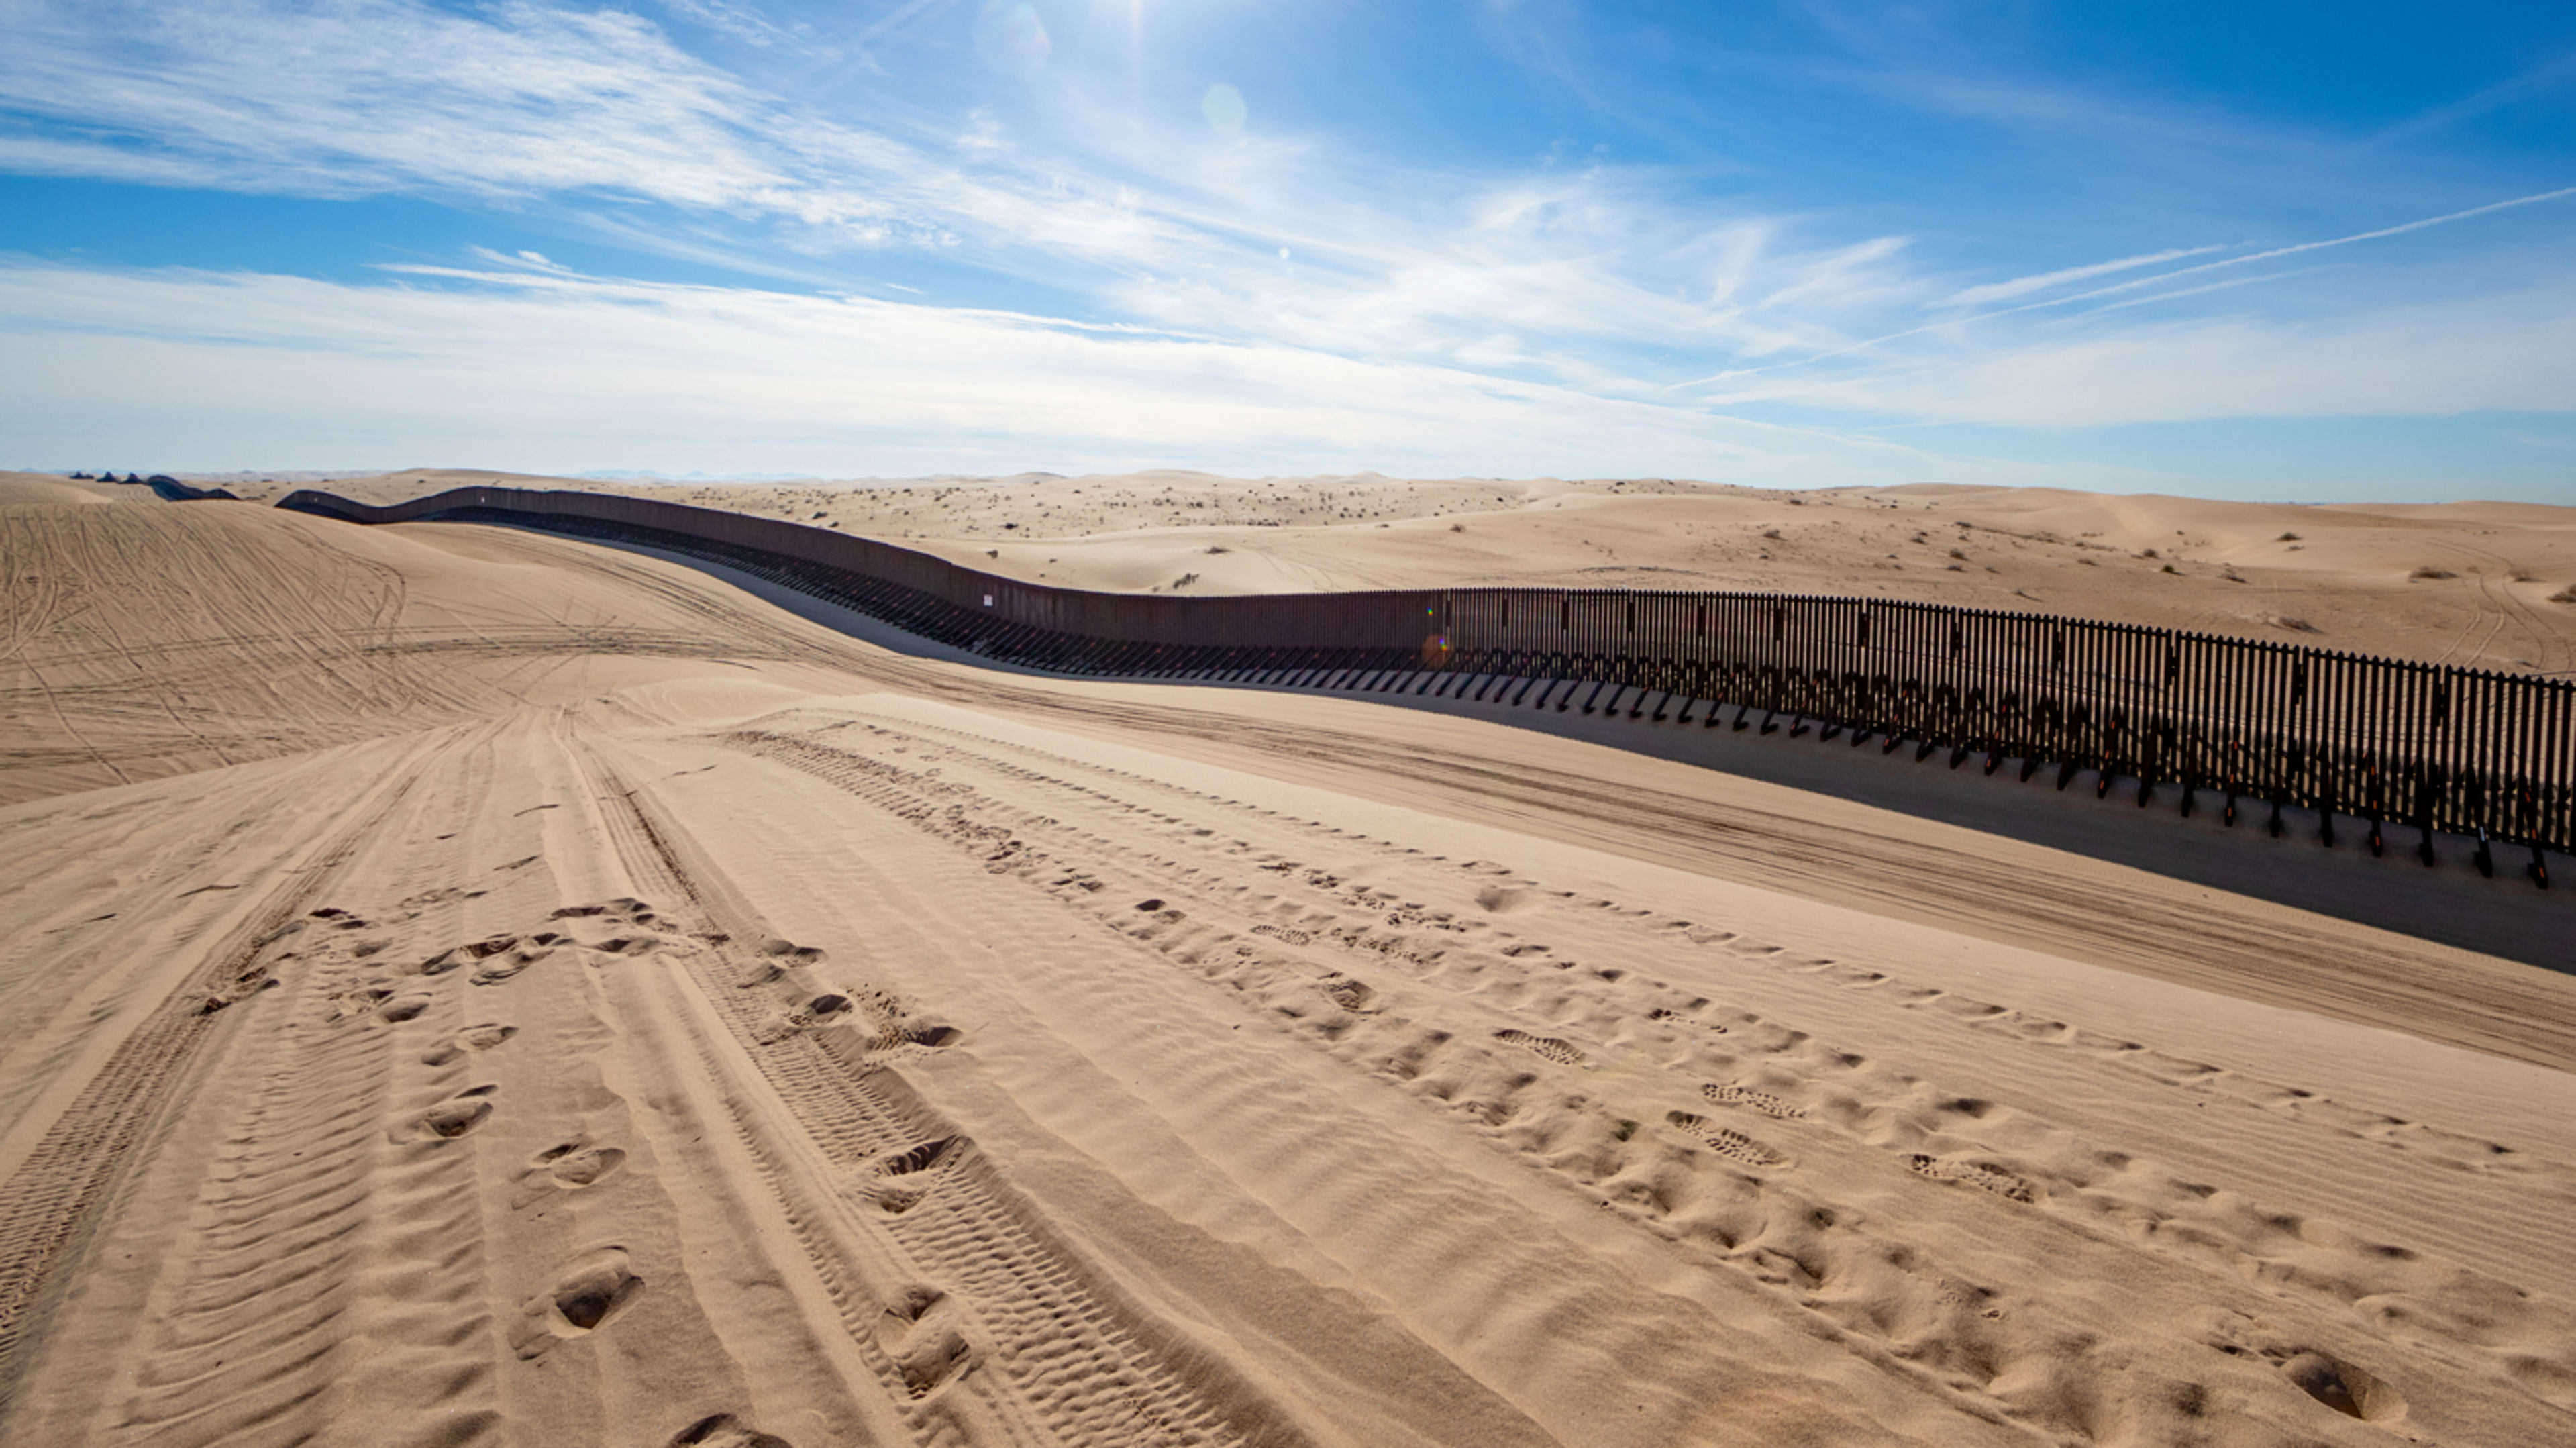 America’s iconic architecture isn’t the White House or the Capitol. It’s the border wall